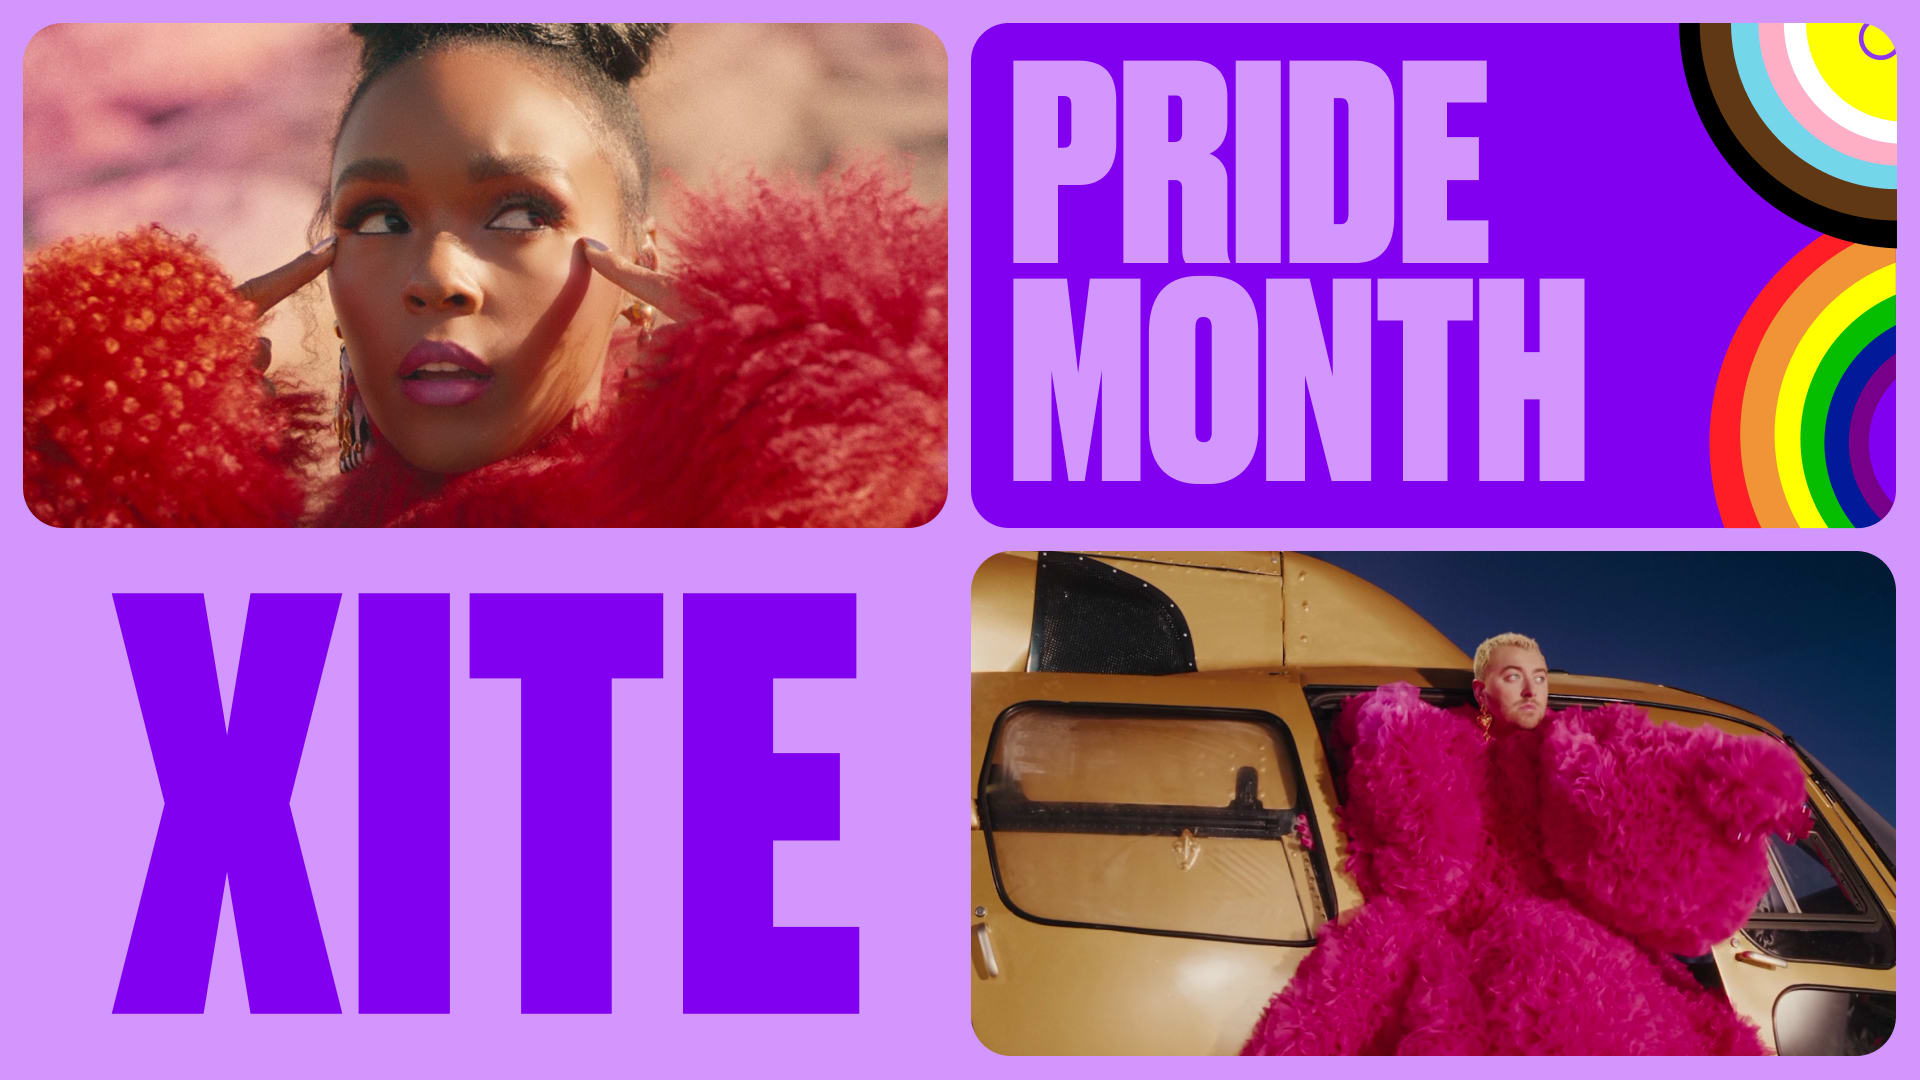 Join XITE in celebrating International Pride Month!